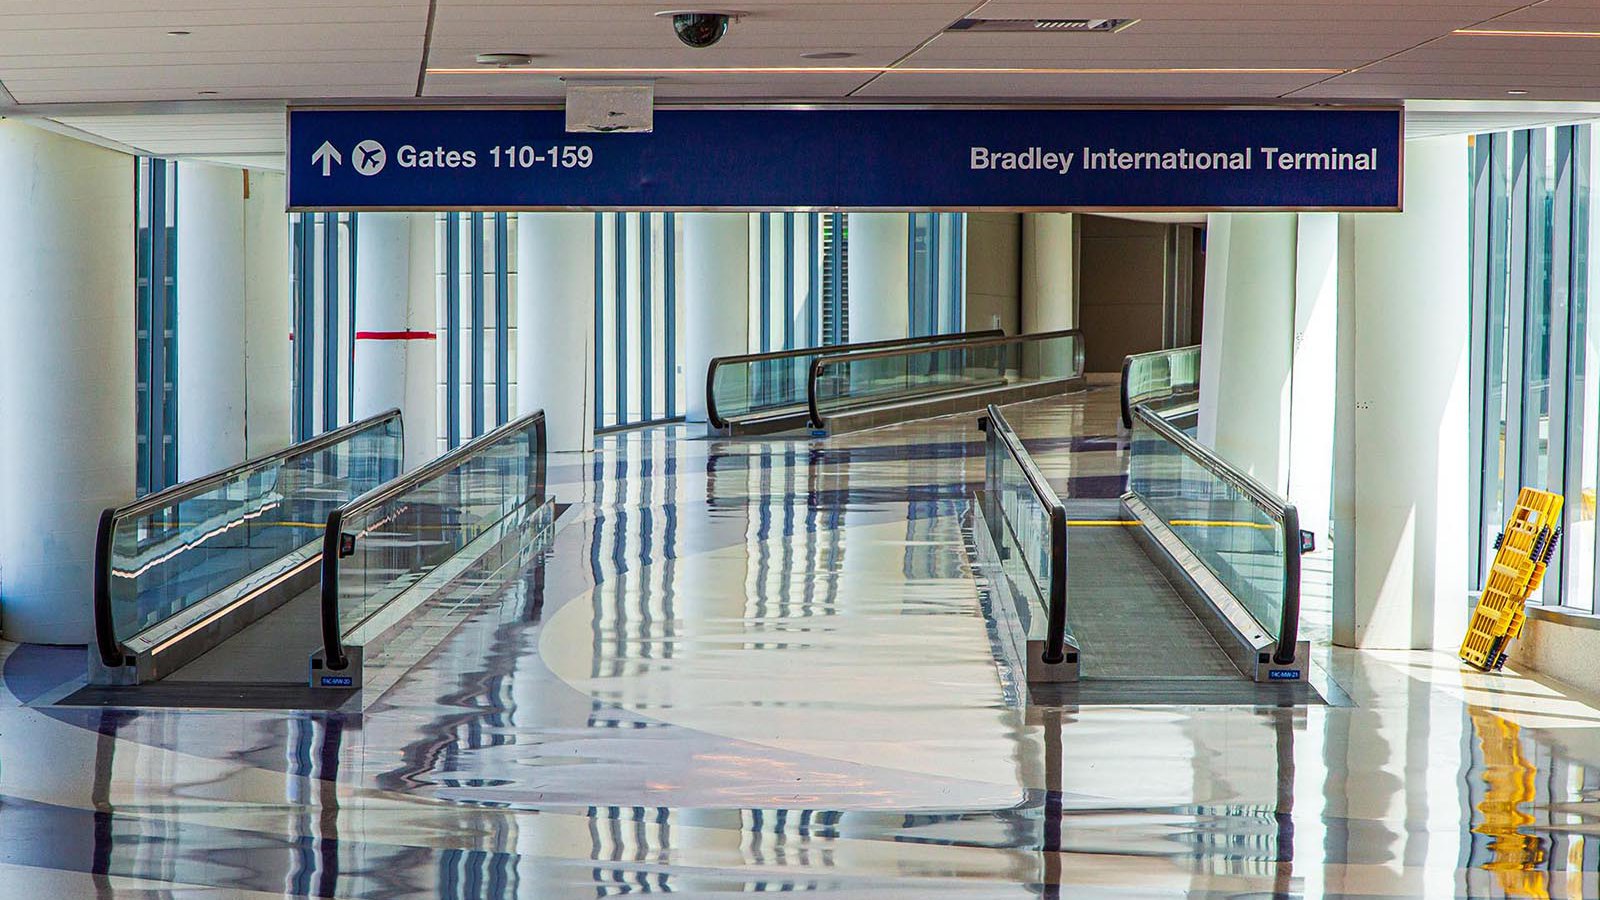 Final Interior Architectural photo showing the completion of construction at Bradley International Terminal at LAX (Los Angeles International Airport)